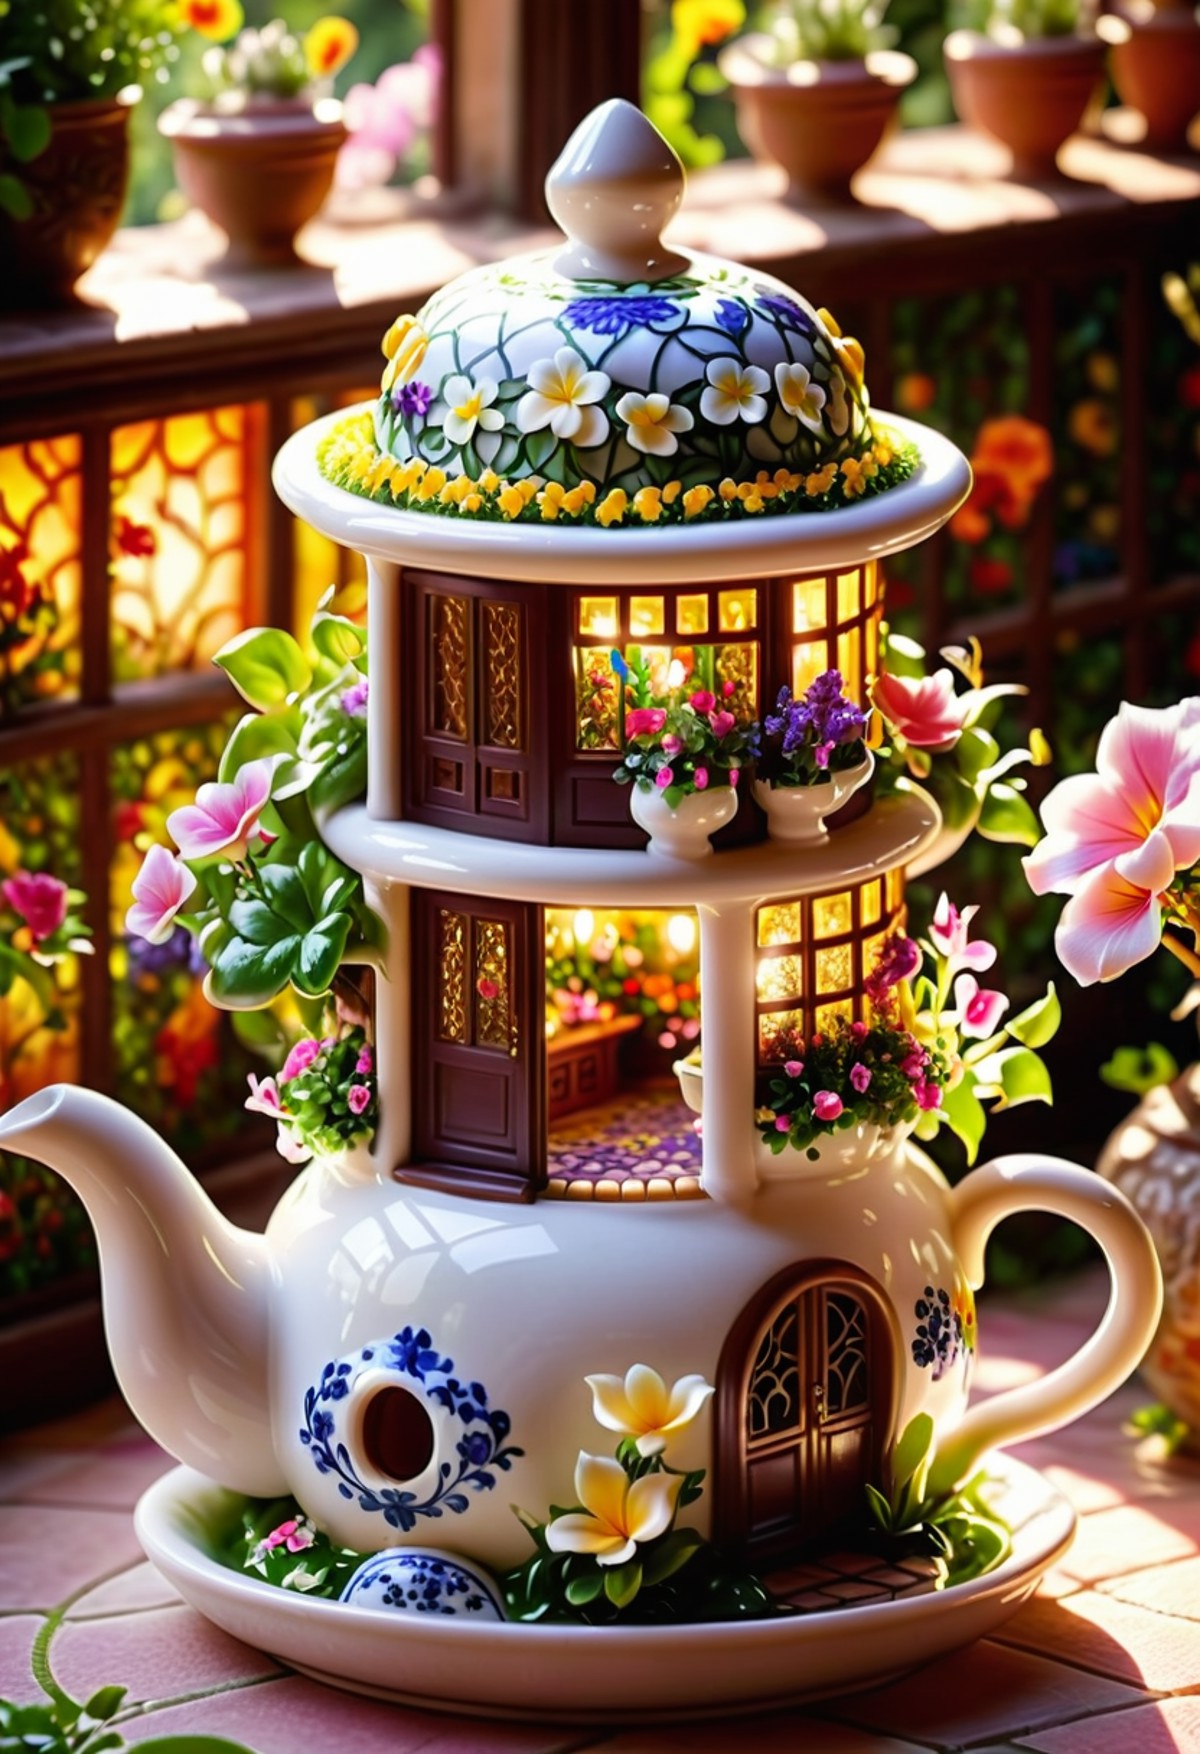 cinematic photo Inside a cozy teapot house, the image depicts a majestic garden filled with colorful flowers and vines. Th...